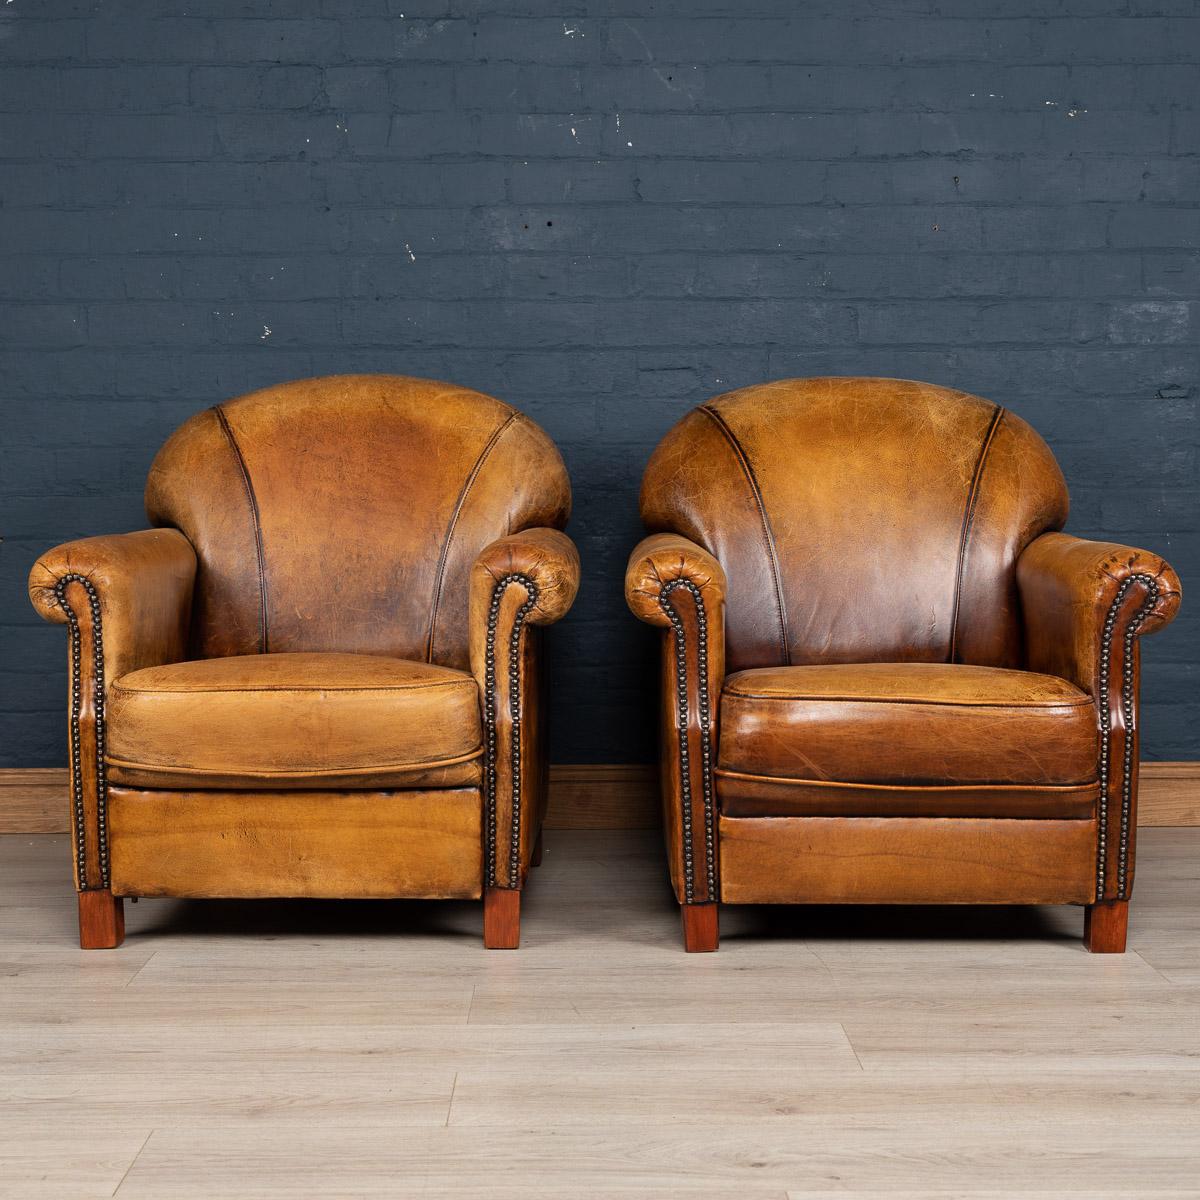 Showing superb patina and color, this wonderful pair of club chairs were hand upholstered sheepskin leather in Holland by the finest craftsmen. Fantastic look for any interior, both modern and traditional.

   
  